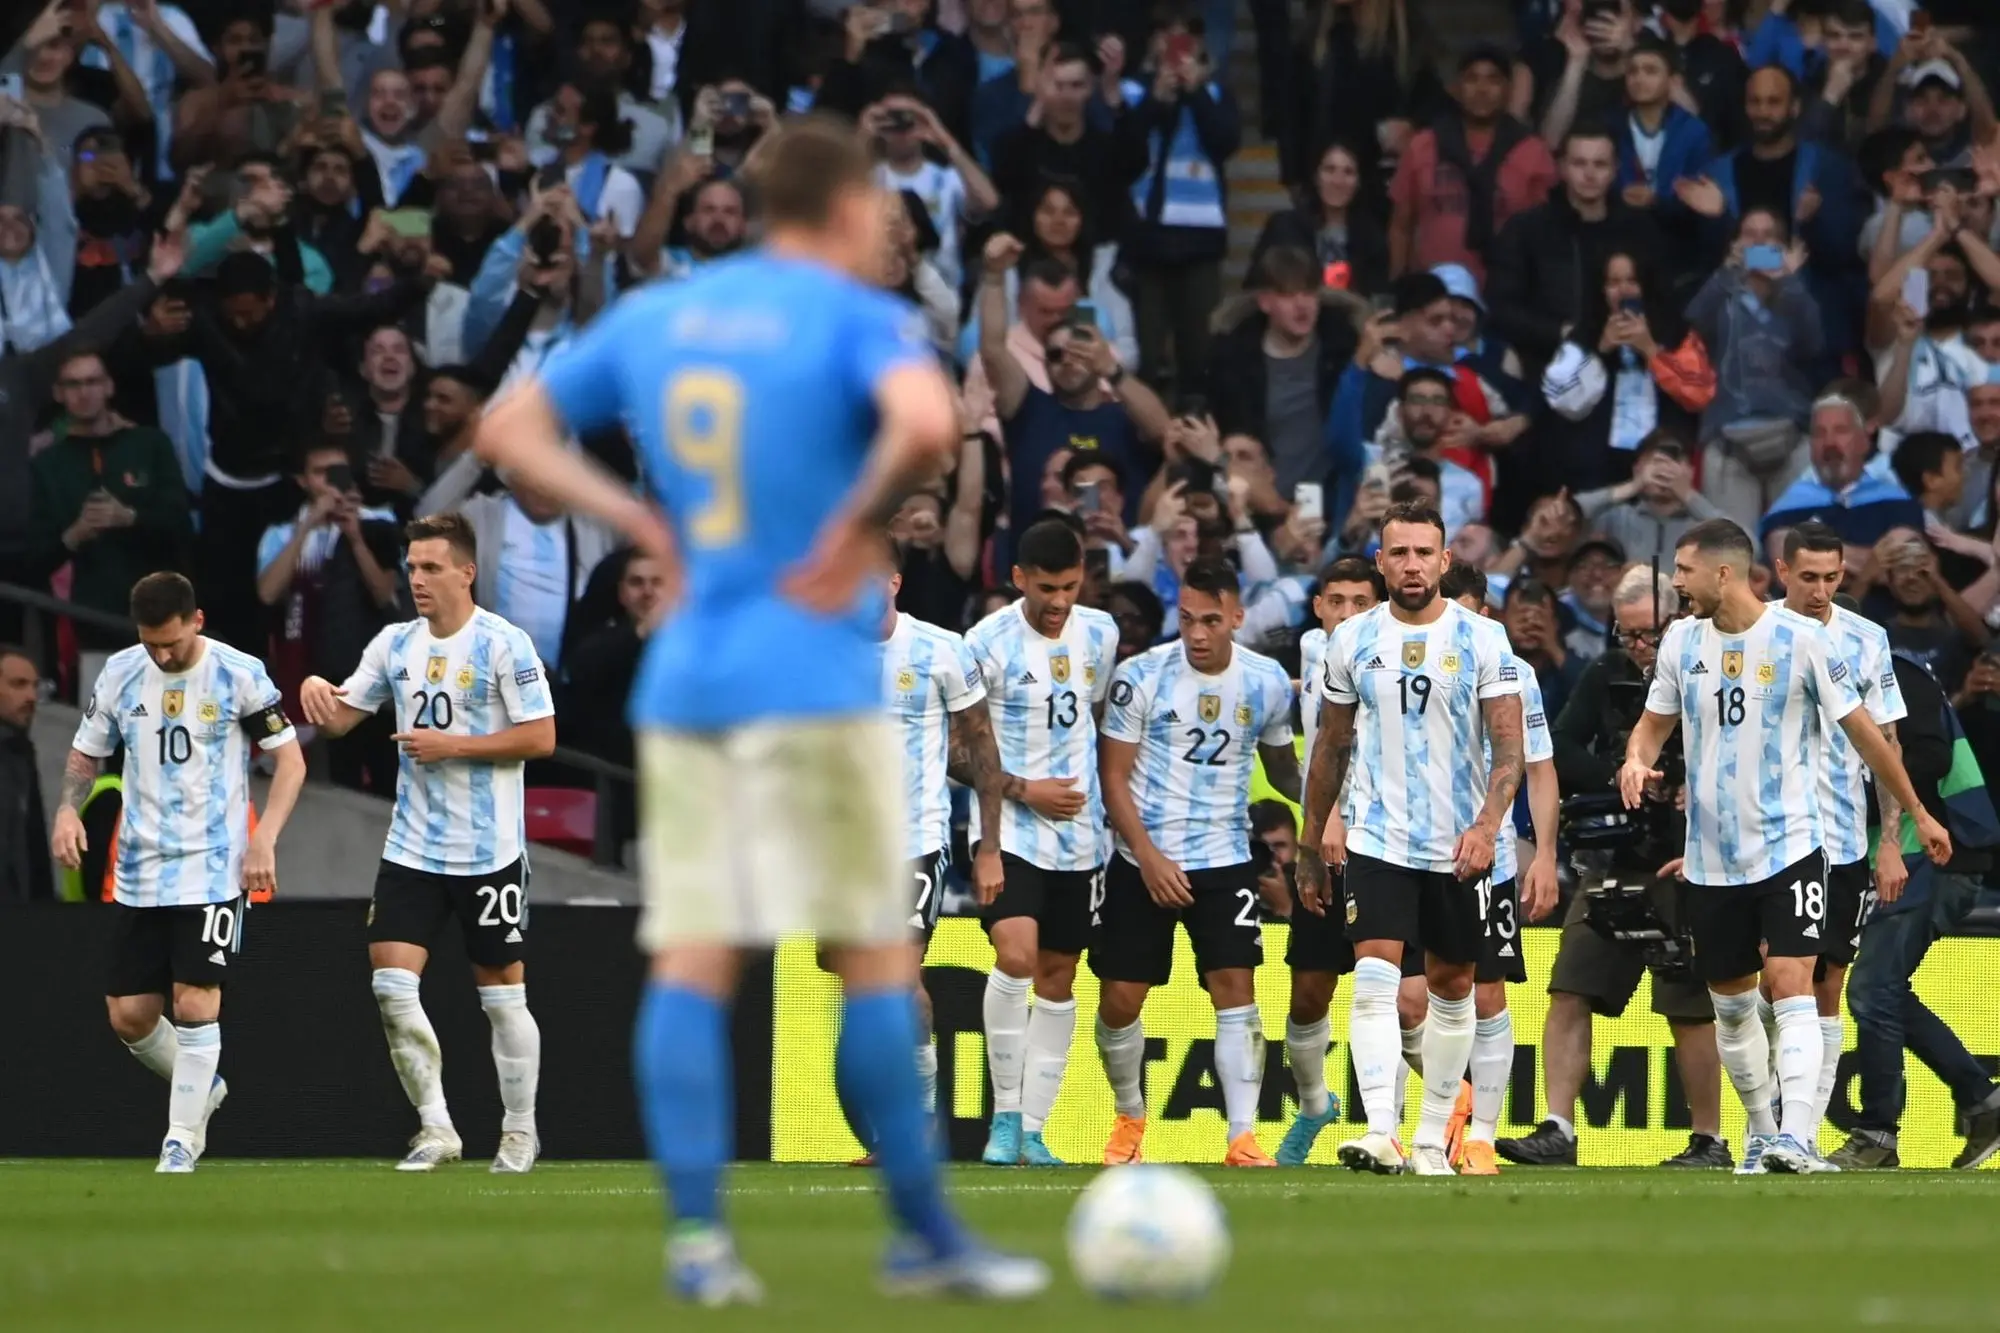 epa09990424 Lautaro Martinez (C-R) of Argentina celebrates with teammates after scoring the 0-1 lead during the Finalissima Conmebol - UEFA Cup of Champions soccer match between Italy and Argentina at Wembley in London, Britain, 01 June 2022. EPA/ANDY RAIN